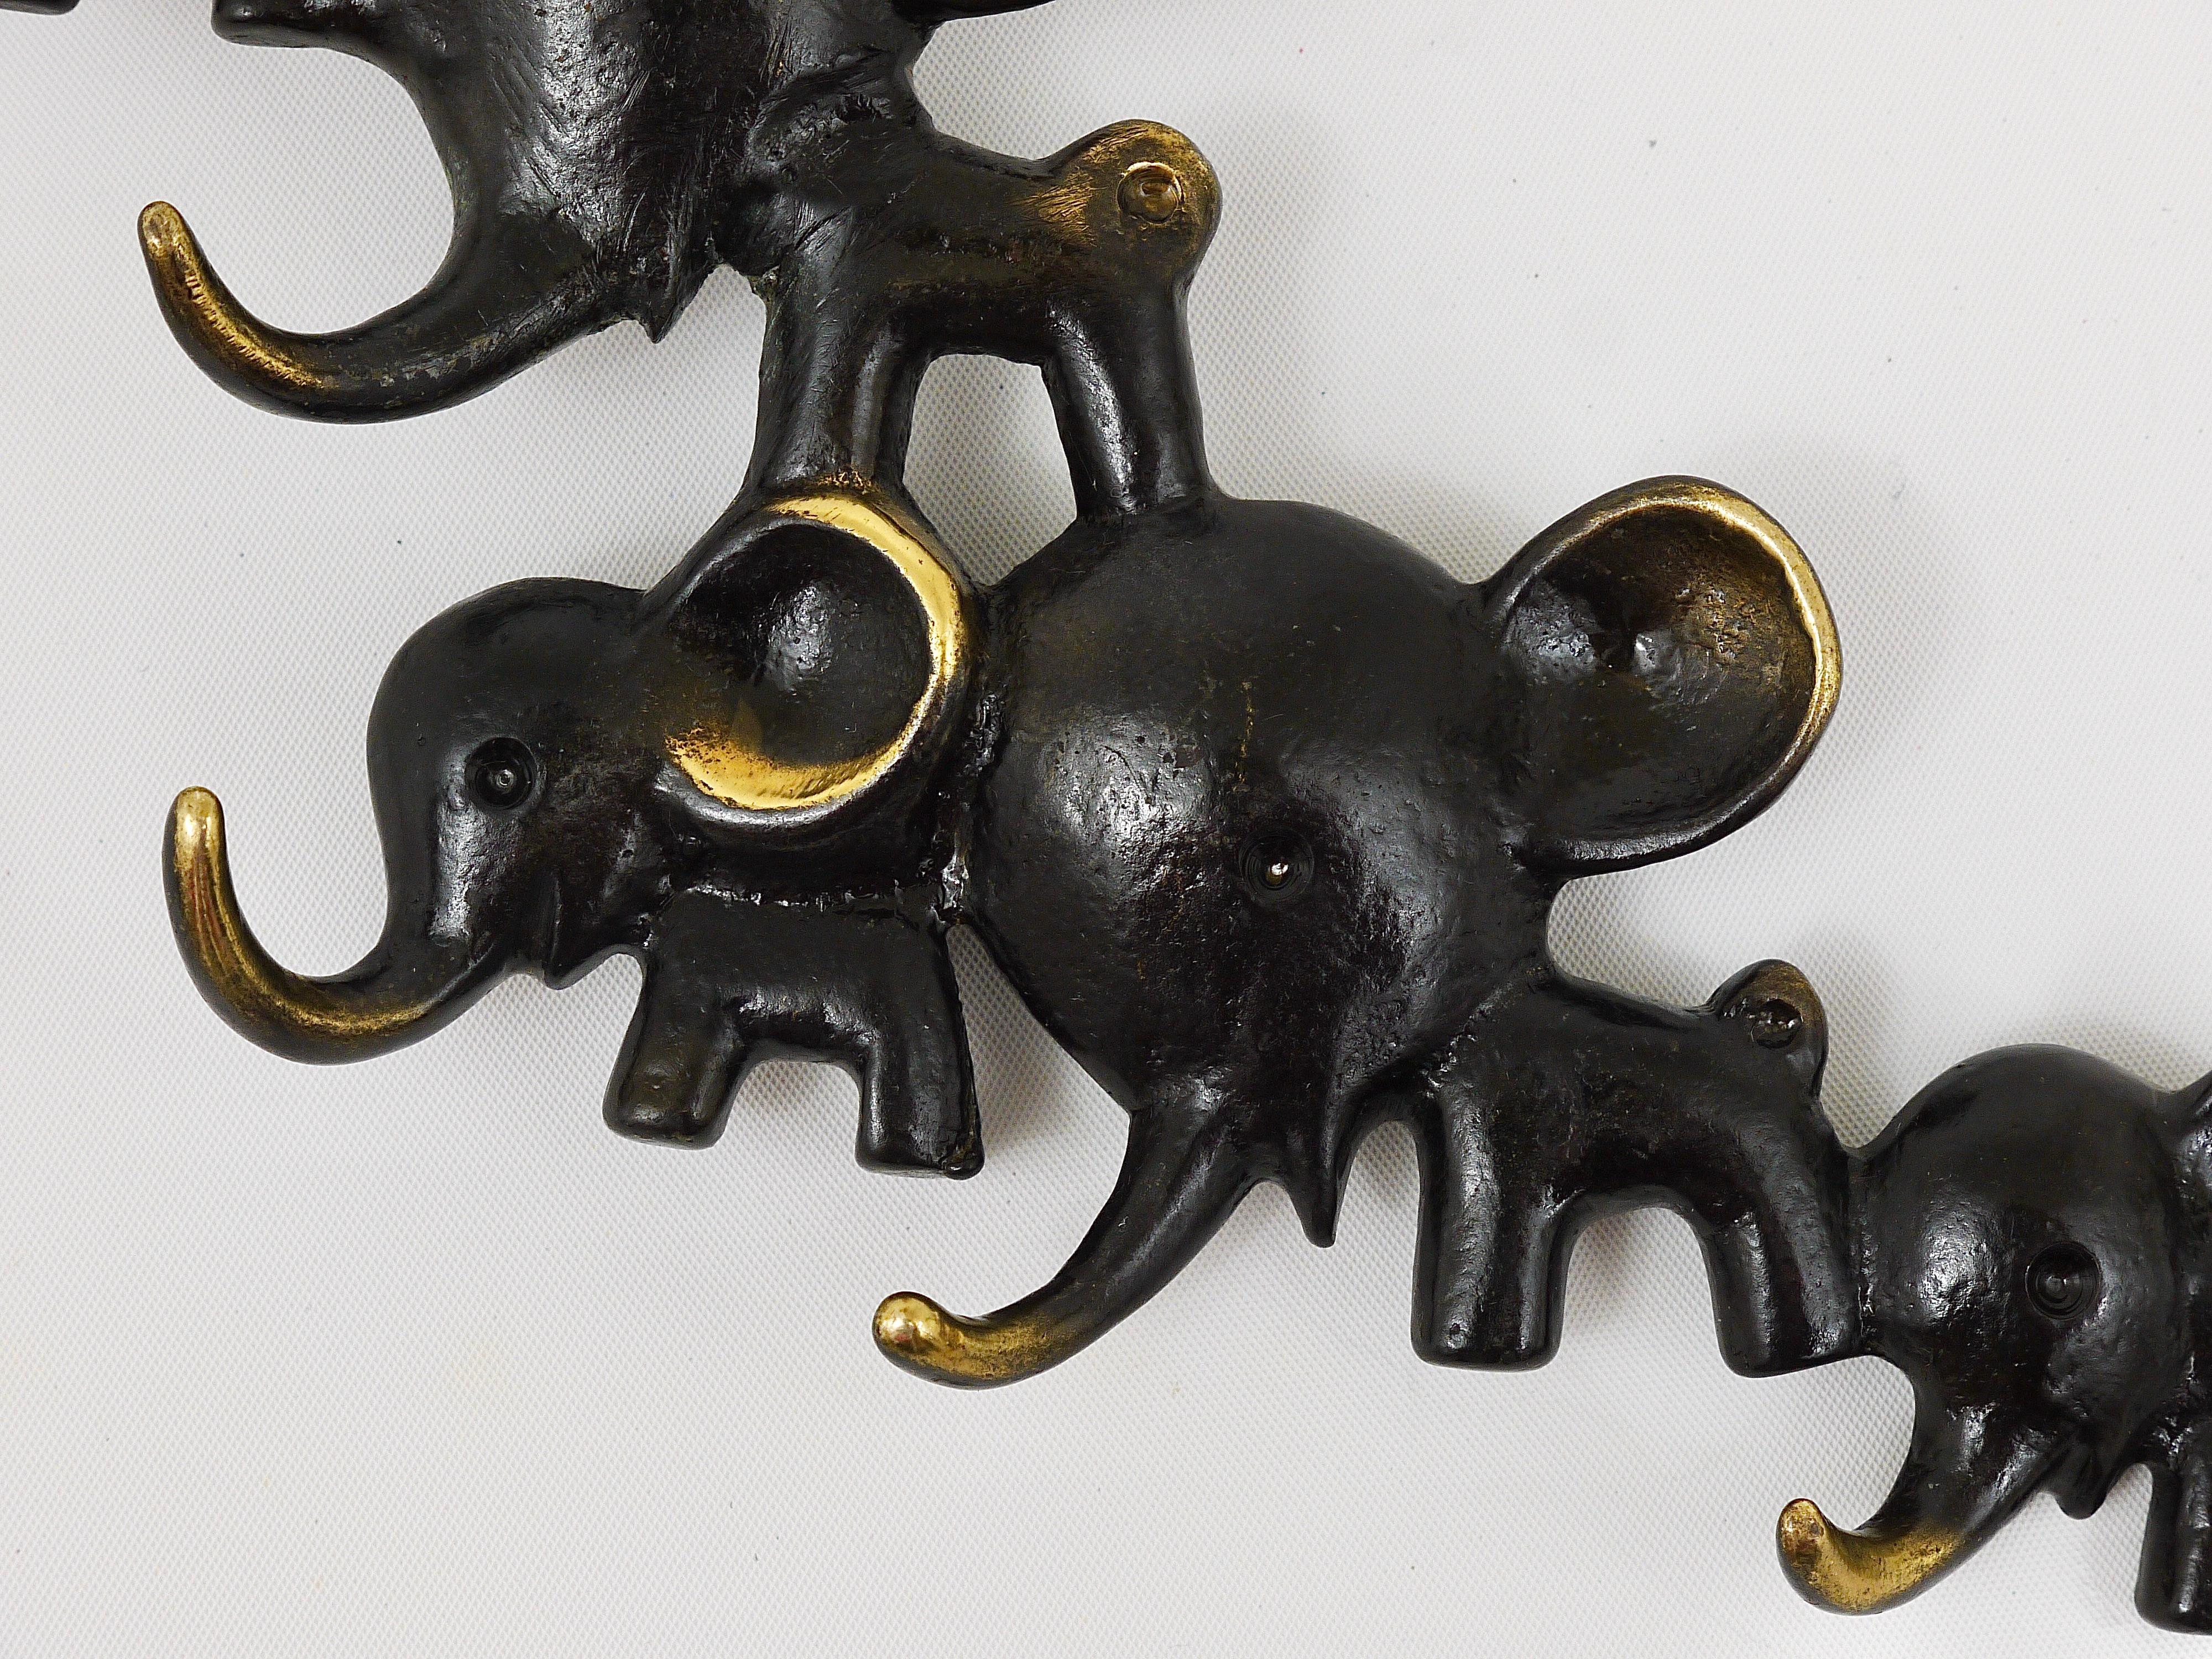 A charming and rare key holder, displaying an elephant family. A very humorous design by Walter Bosse, executed by Hertha Baller, Austria, in the 1950s. Also suitable as a towel holder or for dish towels in the kitchen. Made of brass, in very good